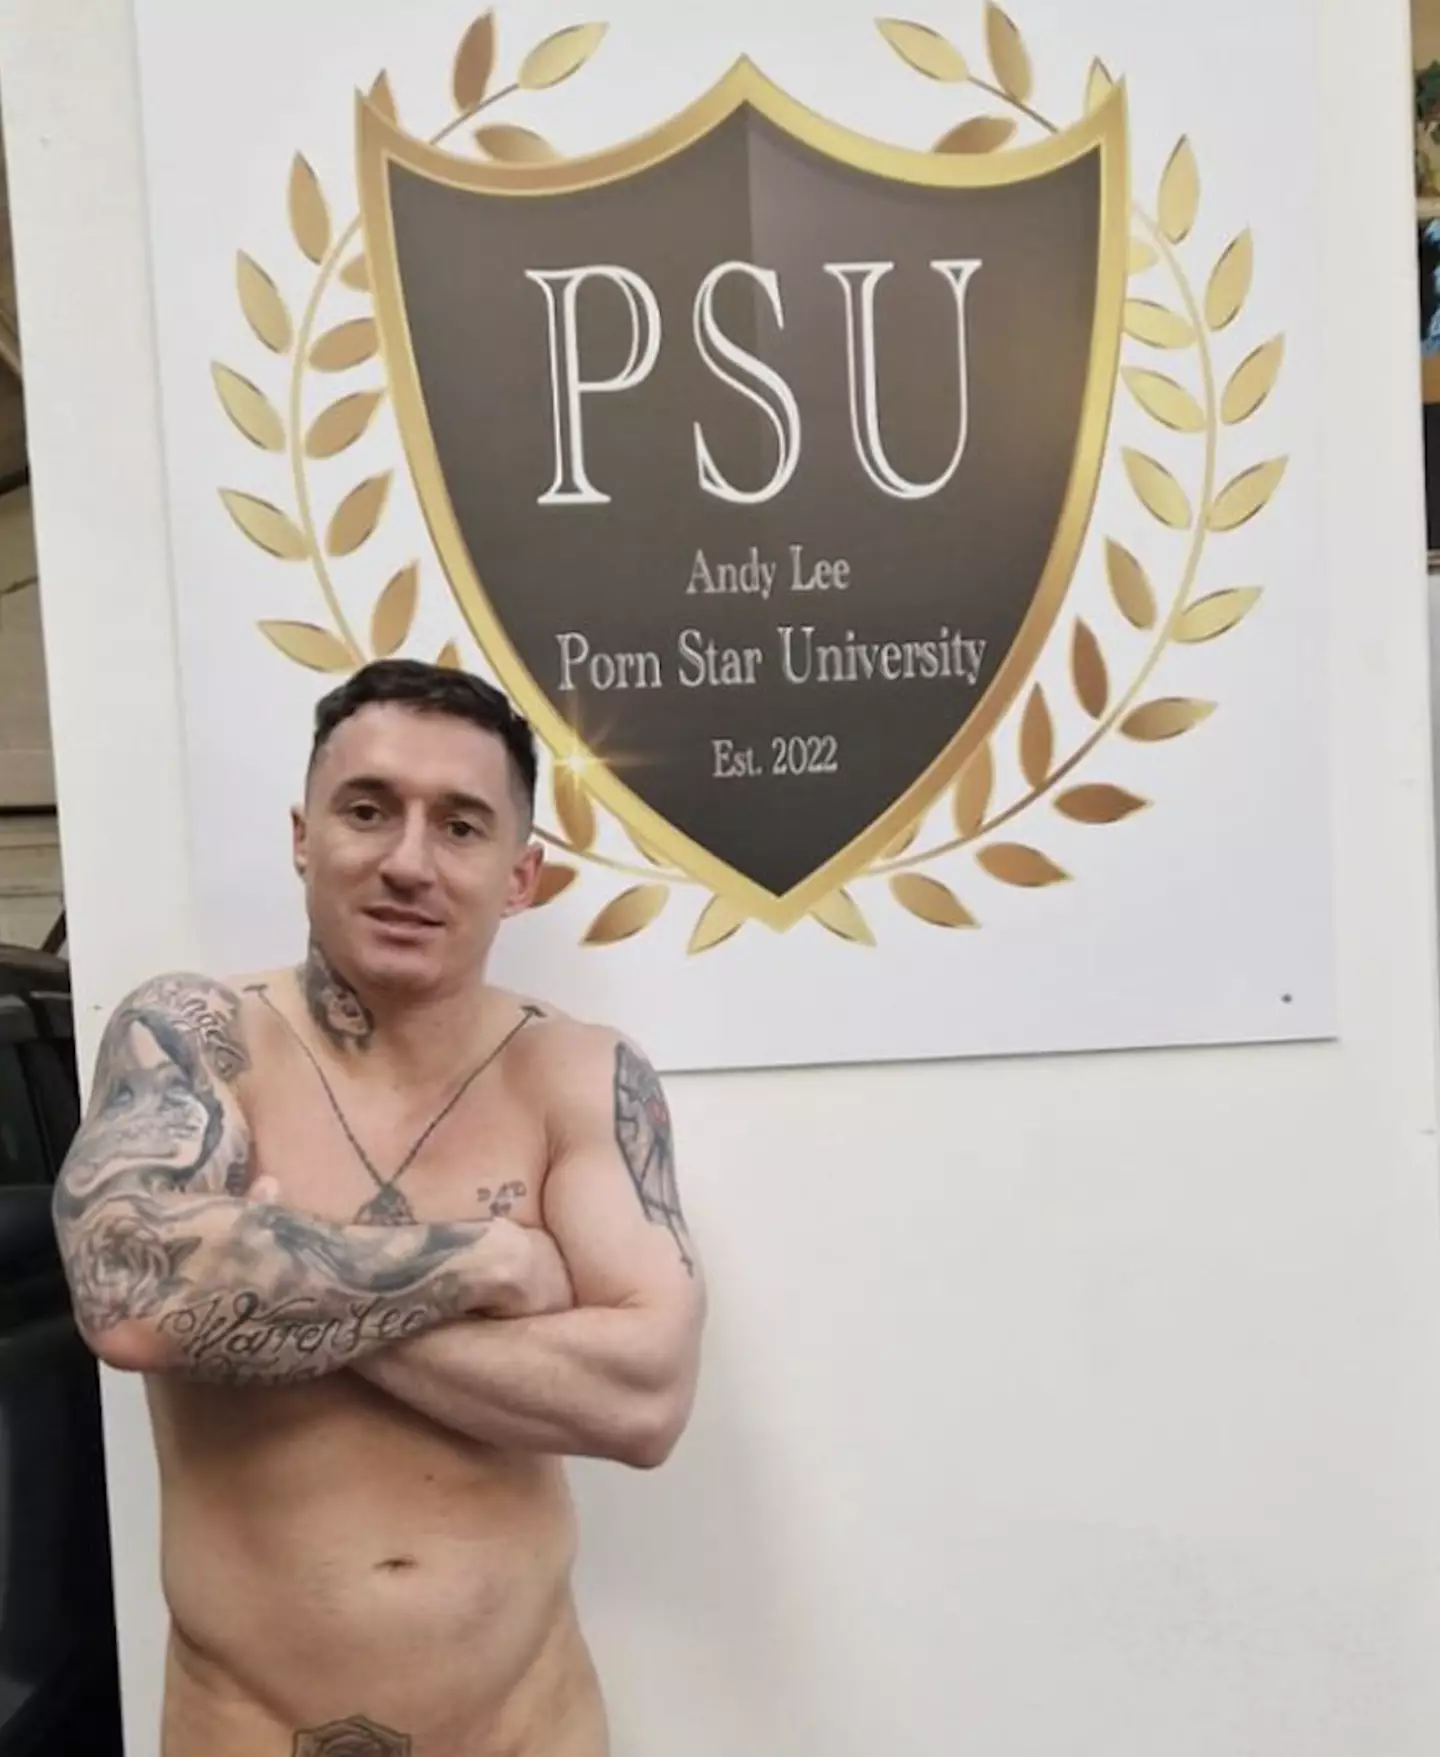 He 'graduated' from Andy Lee's porn academy last year.